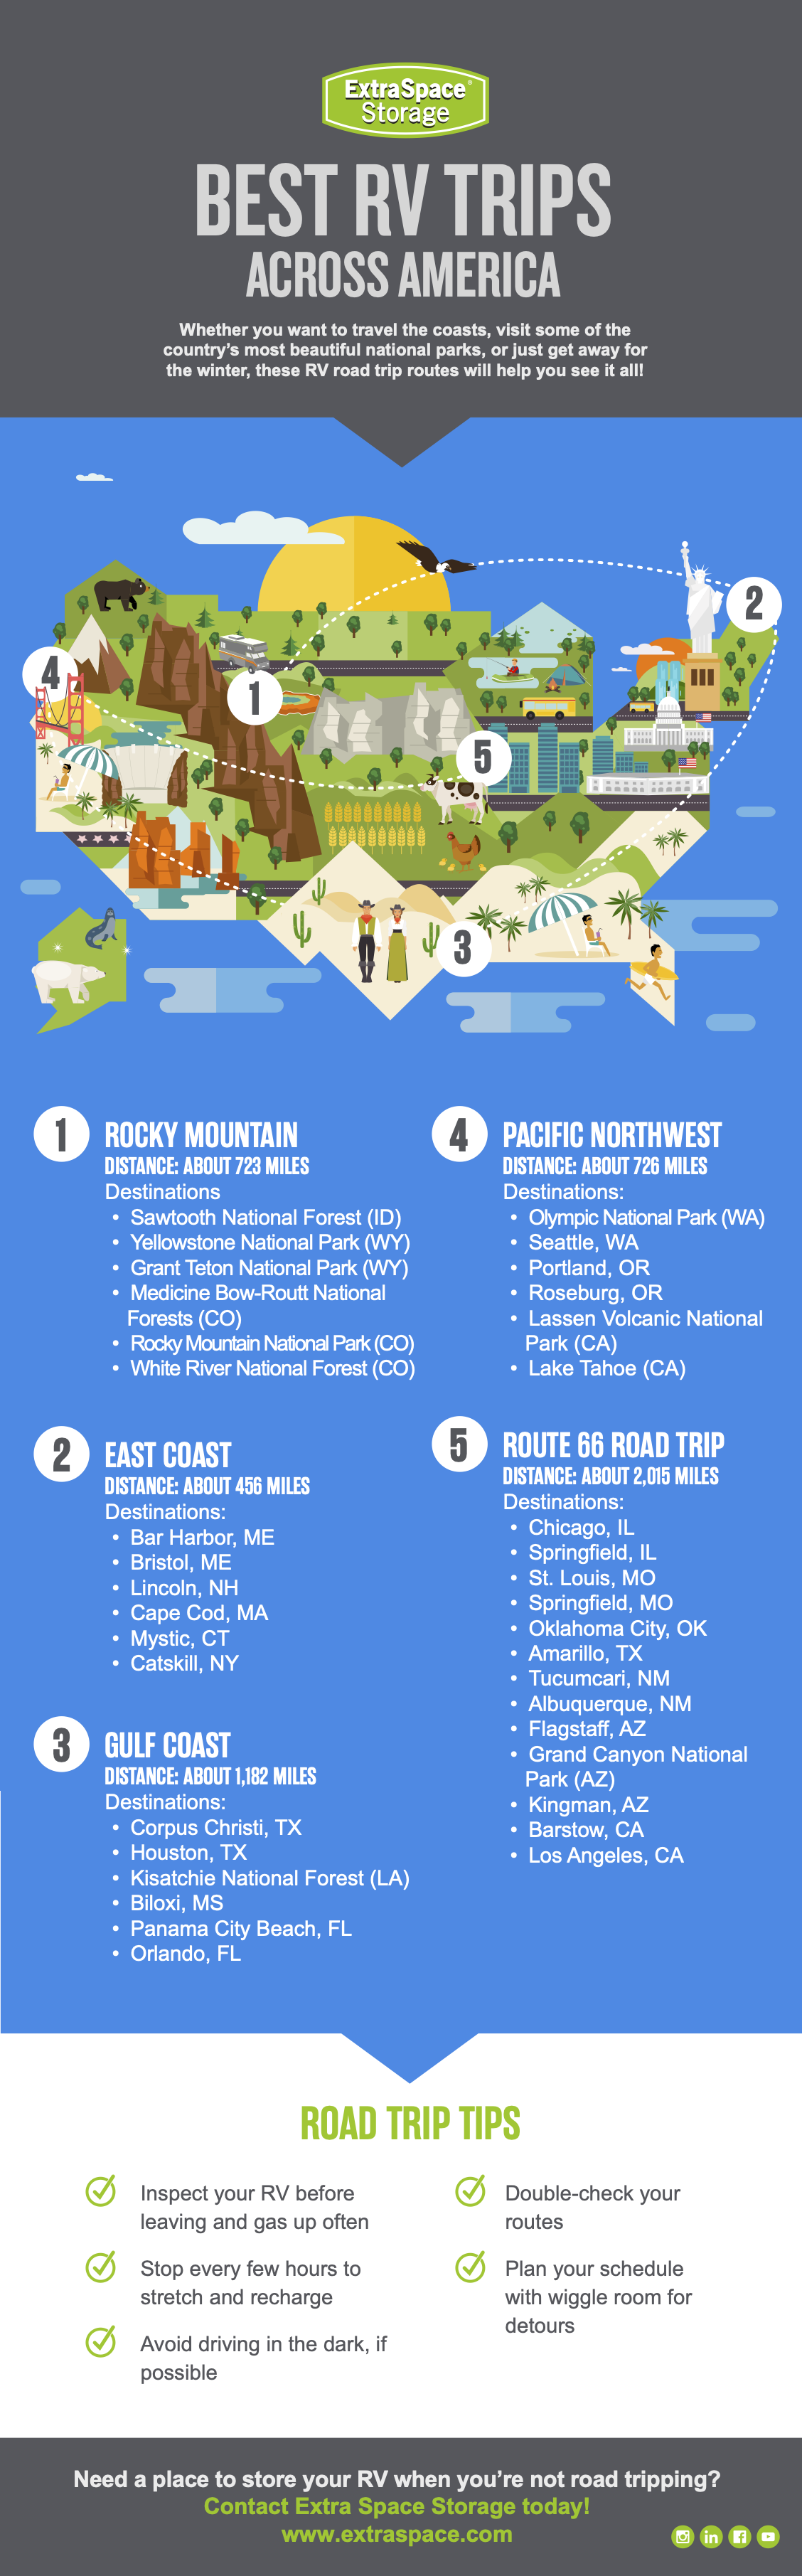 Infographic Describing the Best RV Roadtrip Locations Across the US